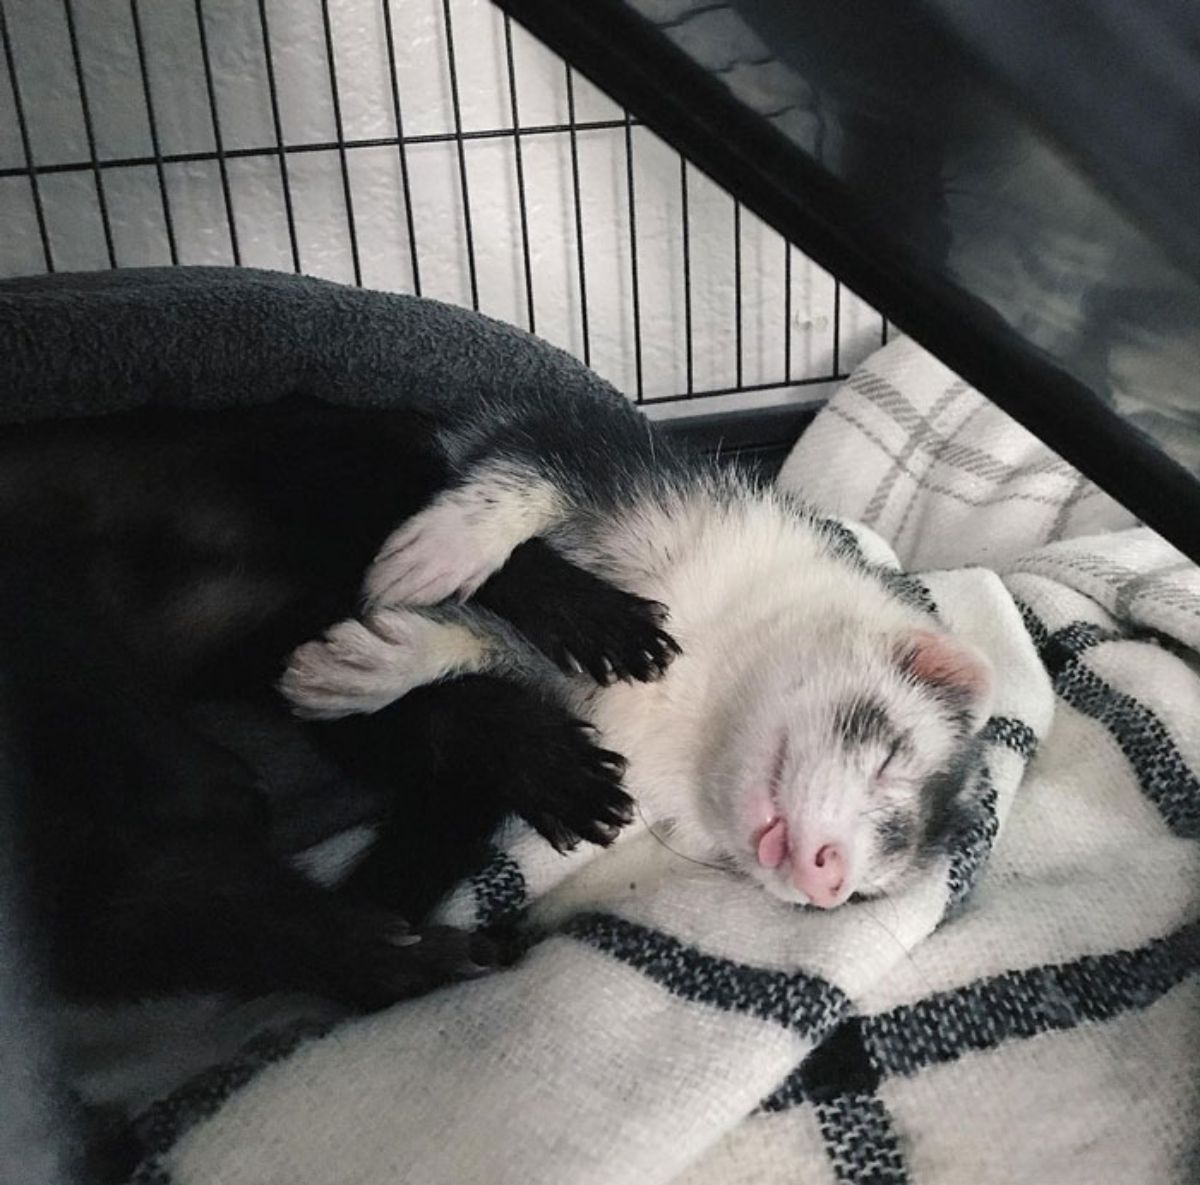 black ferret and white and black ferret cuddled together holding hands with the white and black ferret has its tongue sticking out slightly